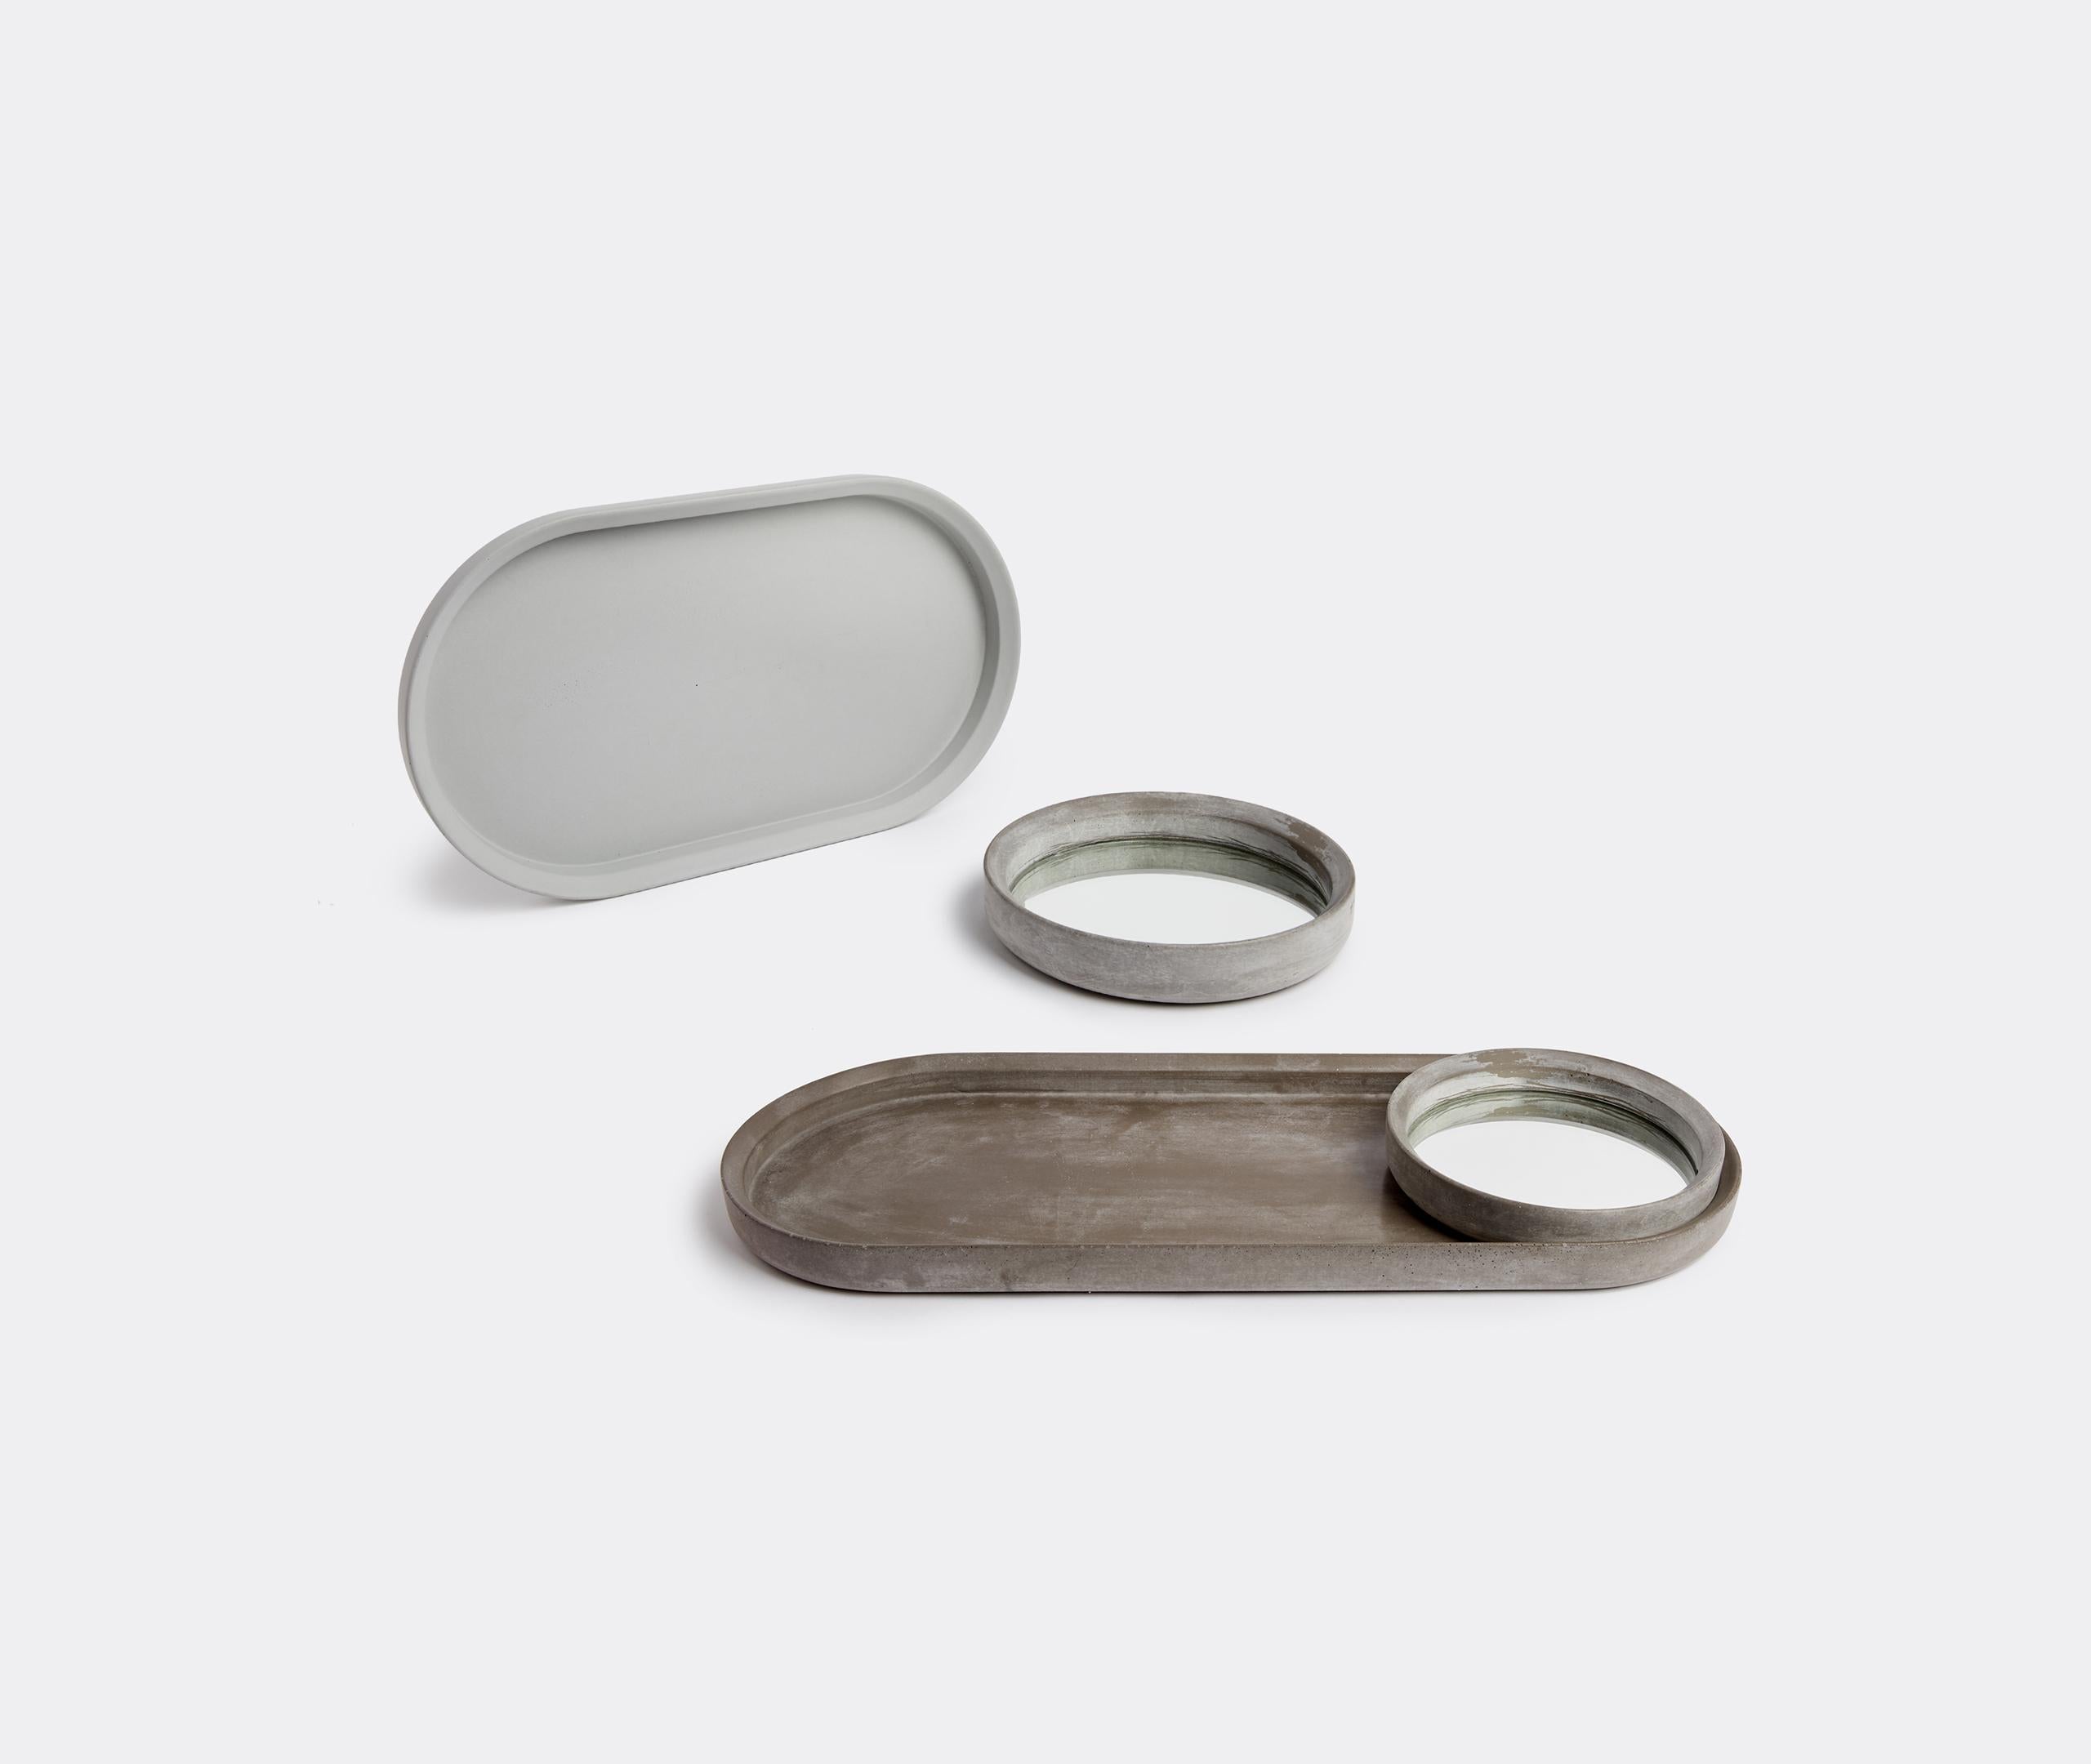 Renzo in a family of multipurpose trays with a very smooth surface and soft curved edges, now available in a different color composition. Each piece is a unique, no two are the same.

Mod II measure: 40 x 23 x 4cm.